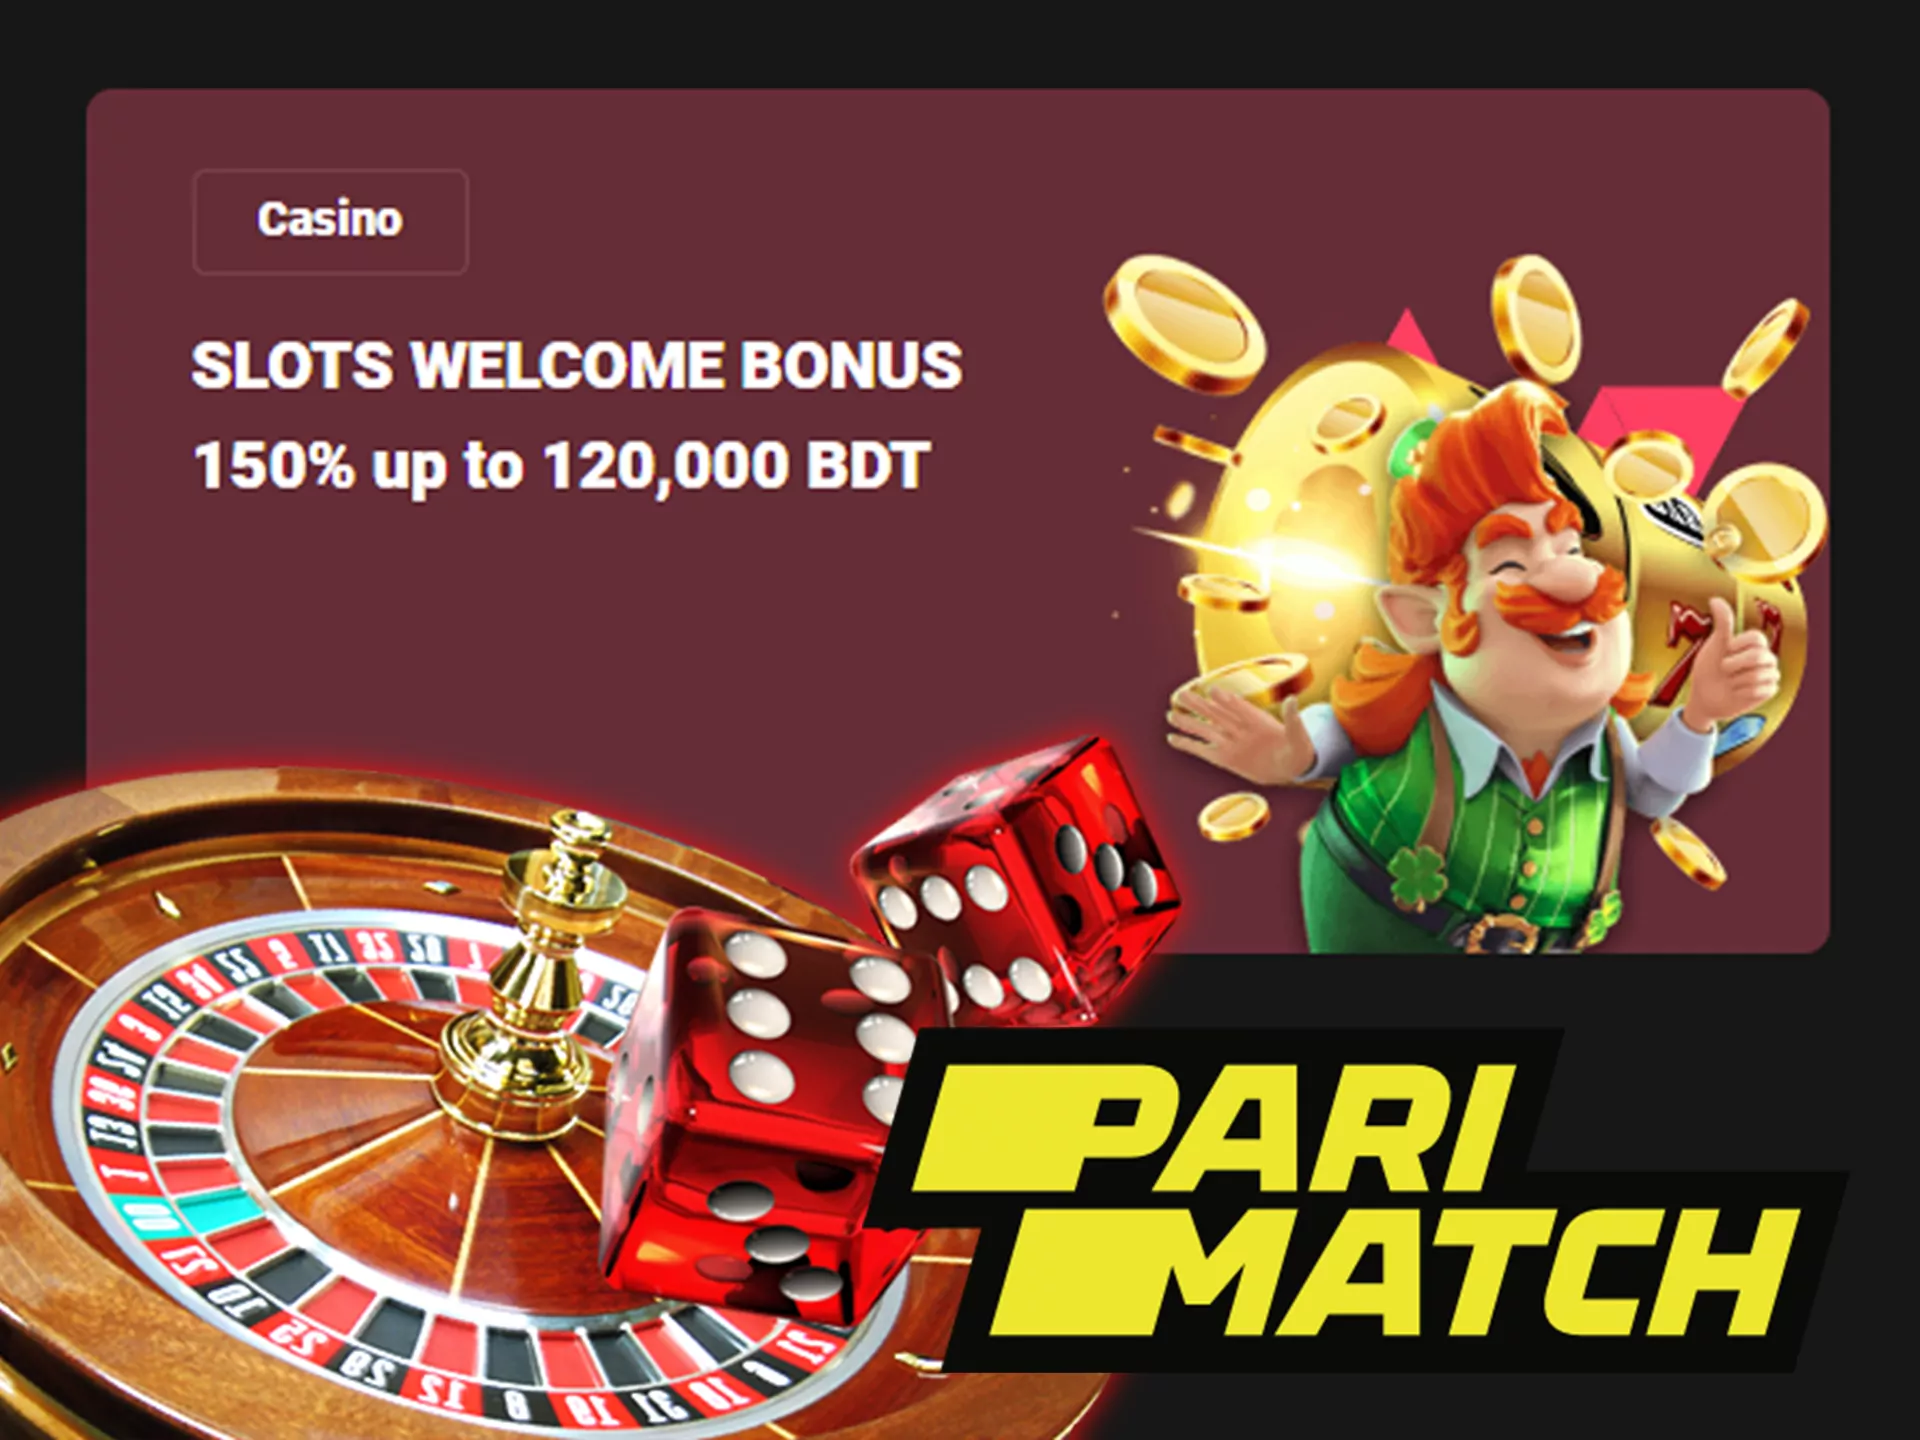 Play slots at Parimatch and get more prizes.